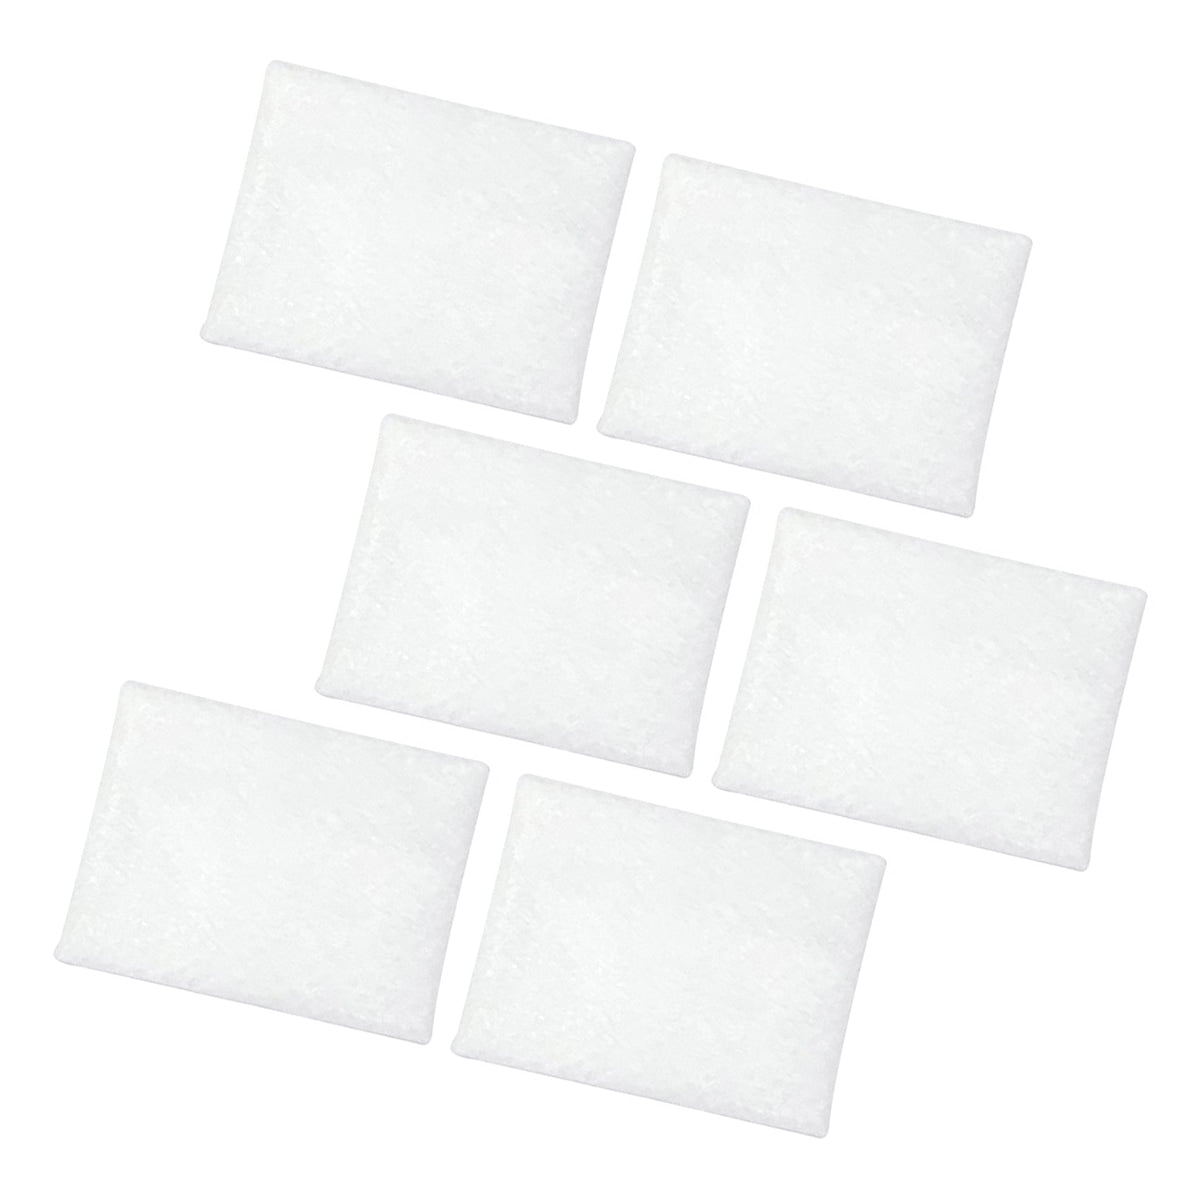 3B Disposable Ultra Fine Filter for Luna G3 Series CPAP Machines (6 Pack)